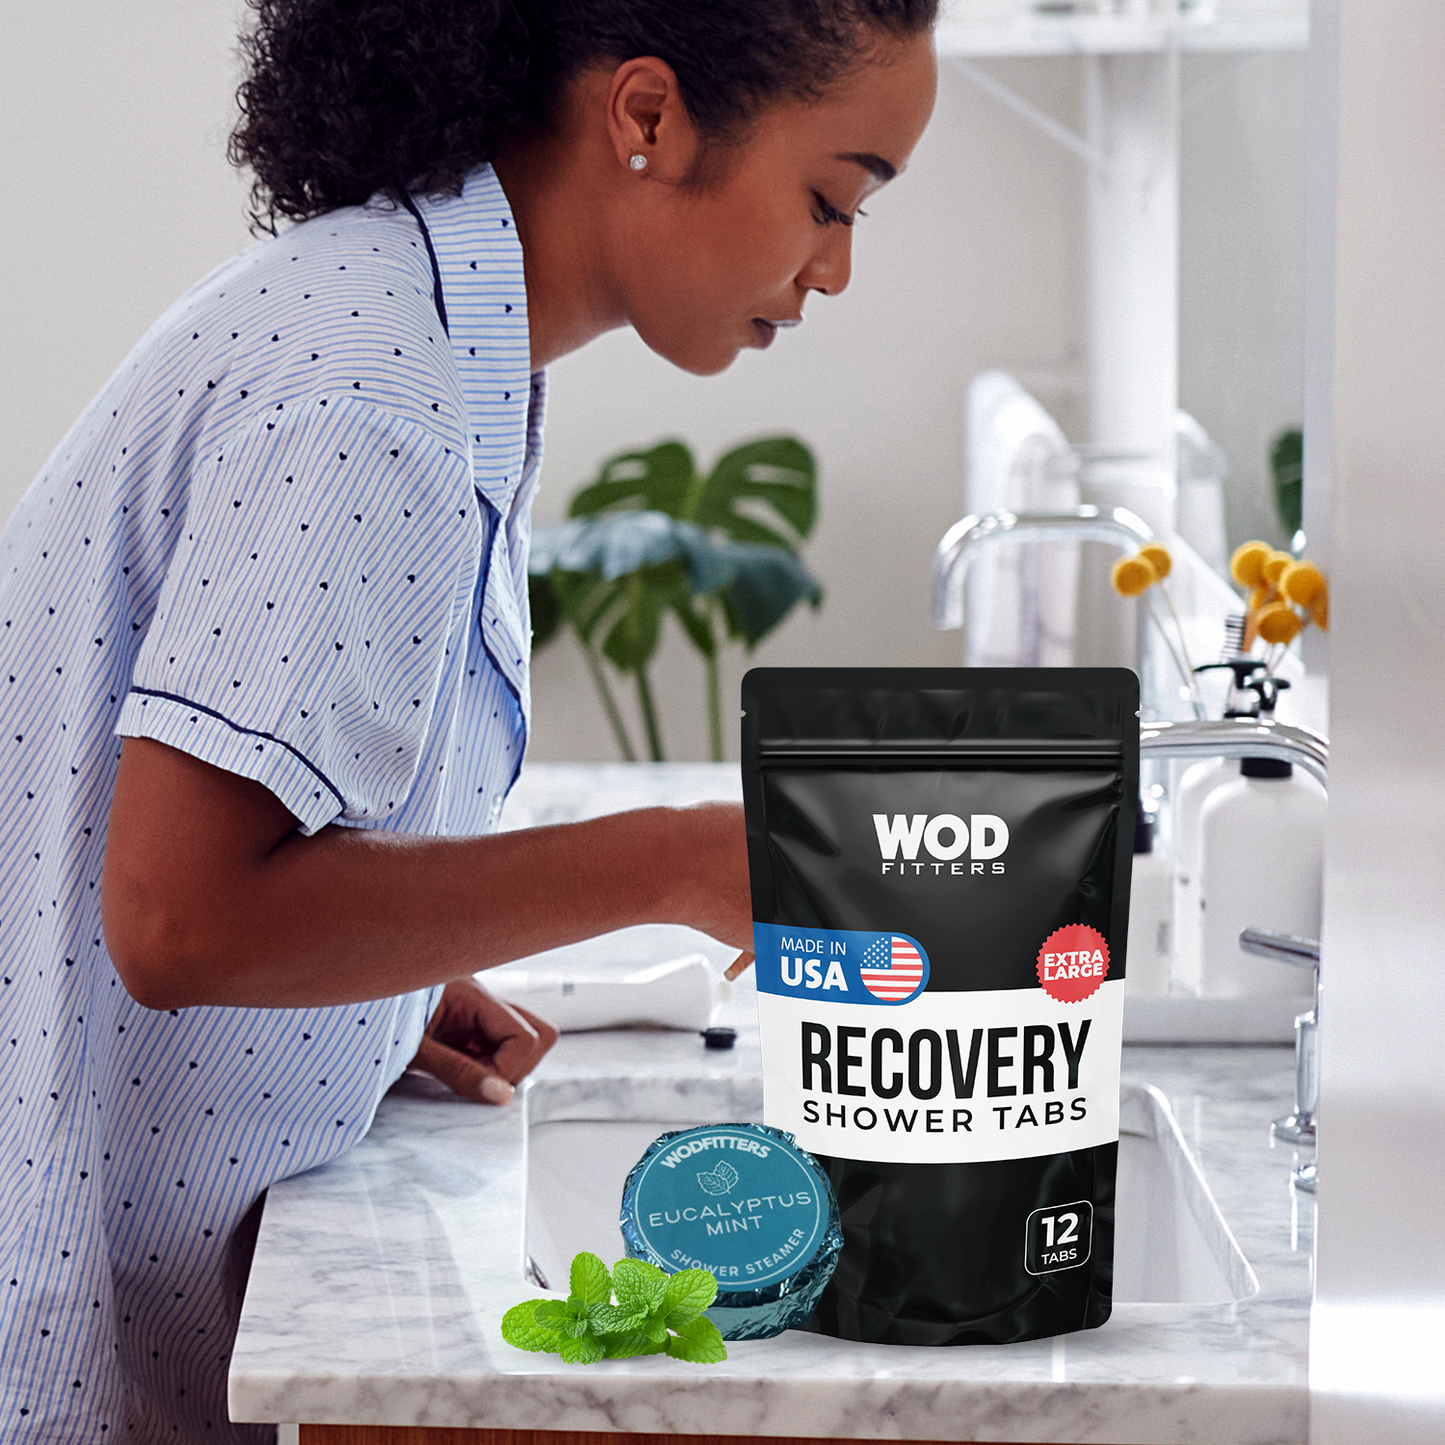 WODFitters USA Made Recovery Shower Steamer Tabs with Intelligent Dosing Technology - Mint & Eucalyptus